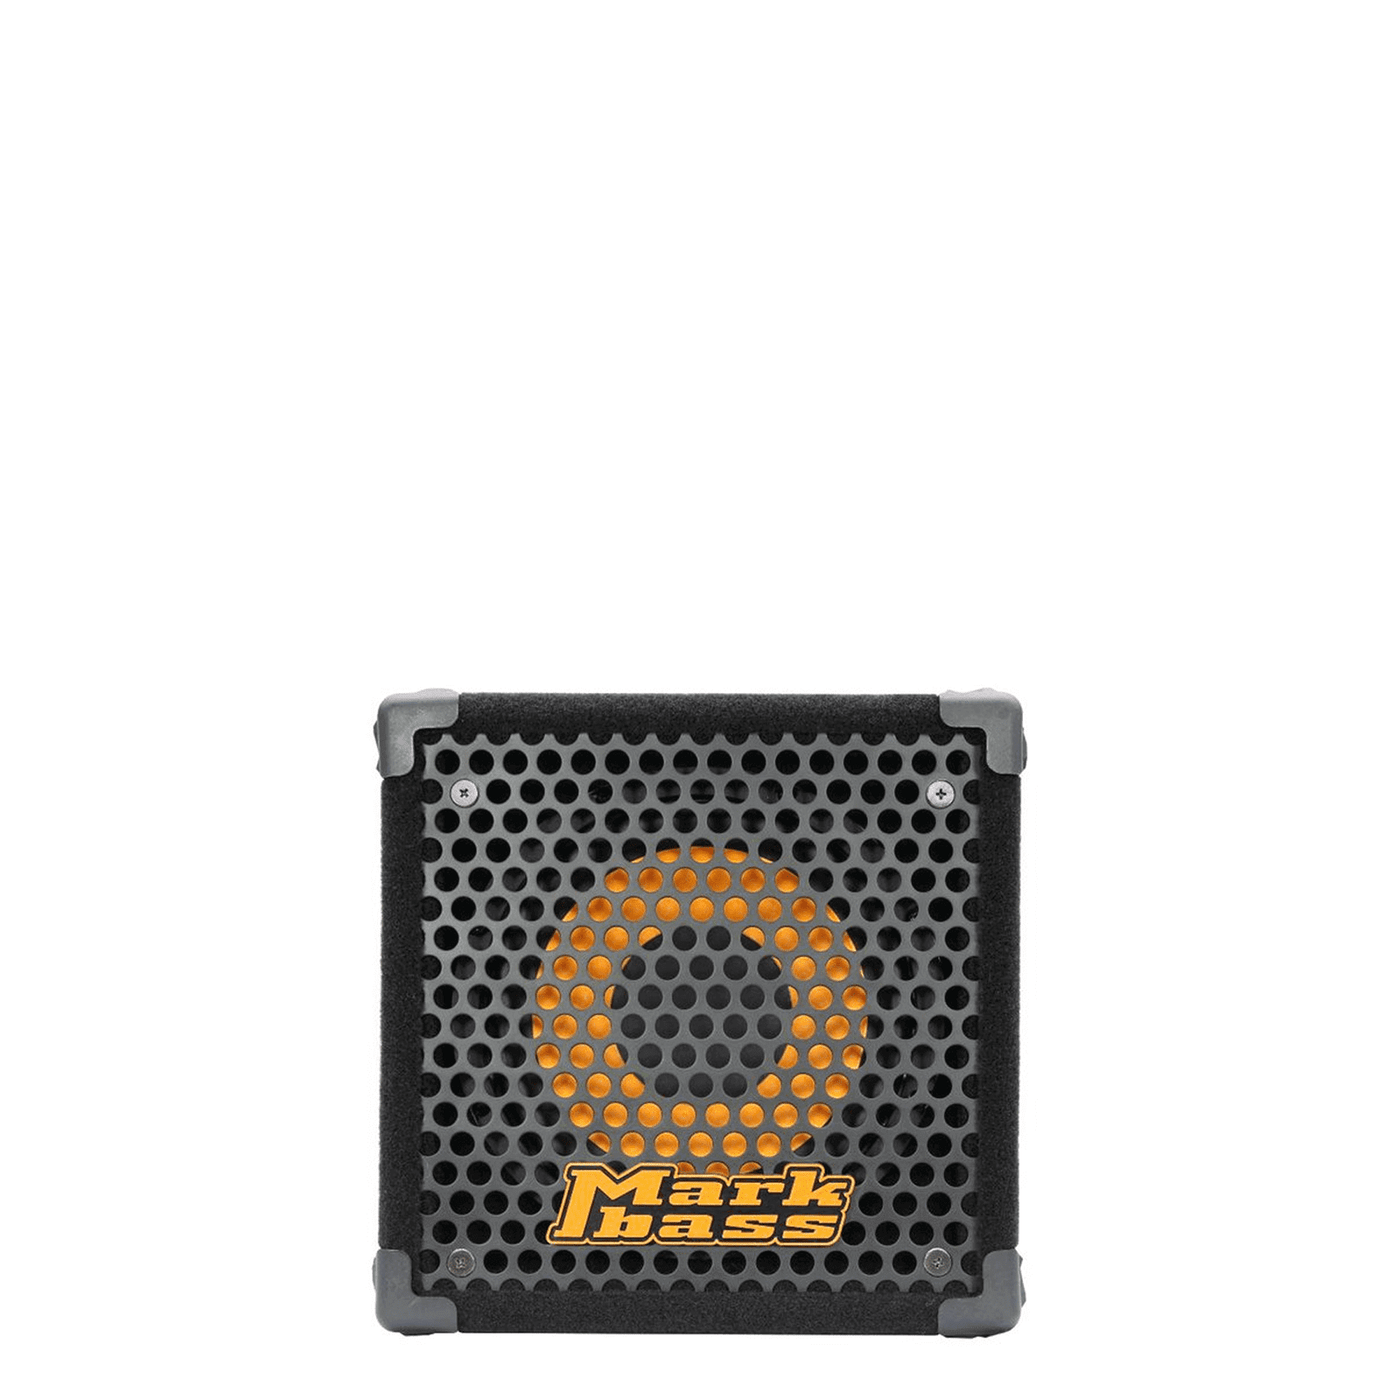 Markbass Micromark 801 Combo - The Micromark now has a big brother—one who is still small enough to deliver the Markbass sound anywhere, but big enough to provide a fuller sound with plenty of bottom end!The Micromark 801 features a single yellow 8” Markb